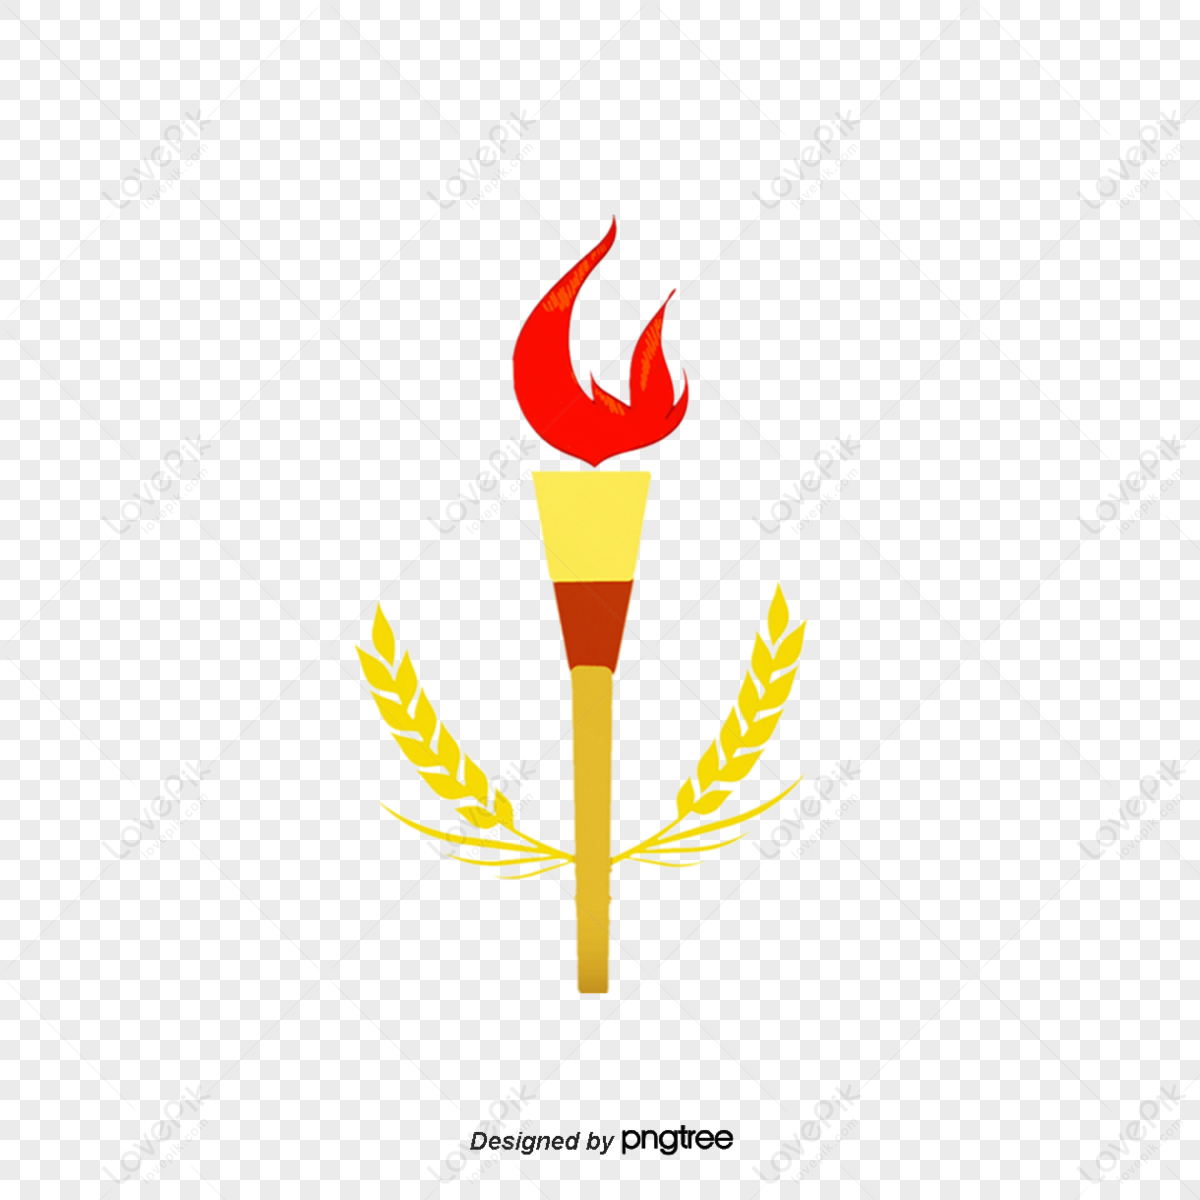 Fire Torch Vector Art, Icons, and Graphics for Free Download